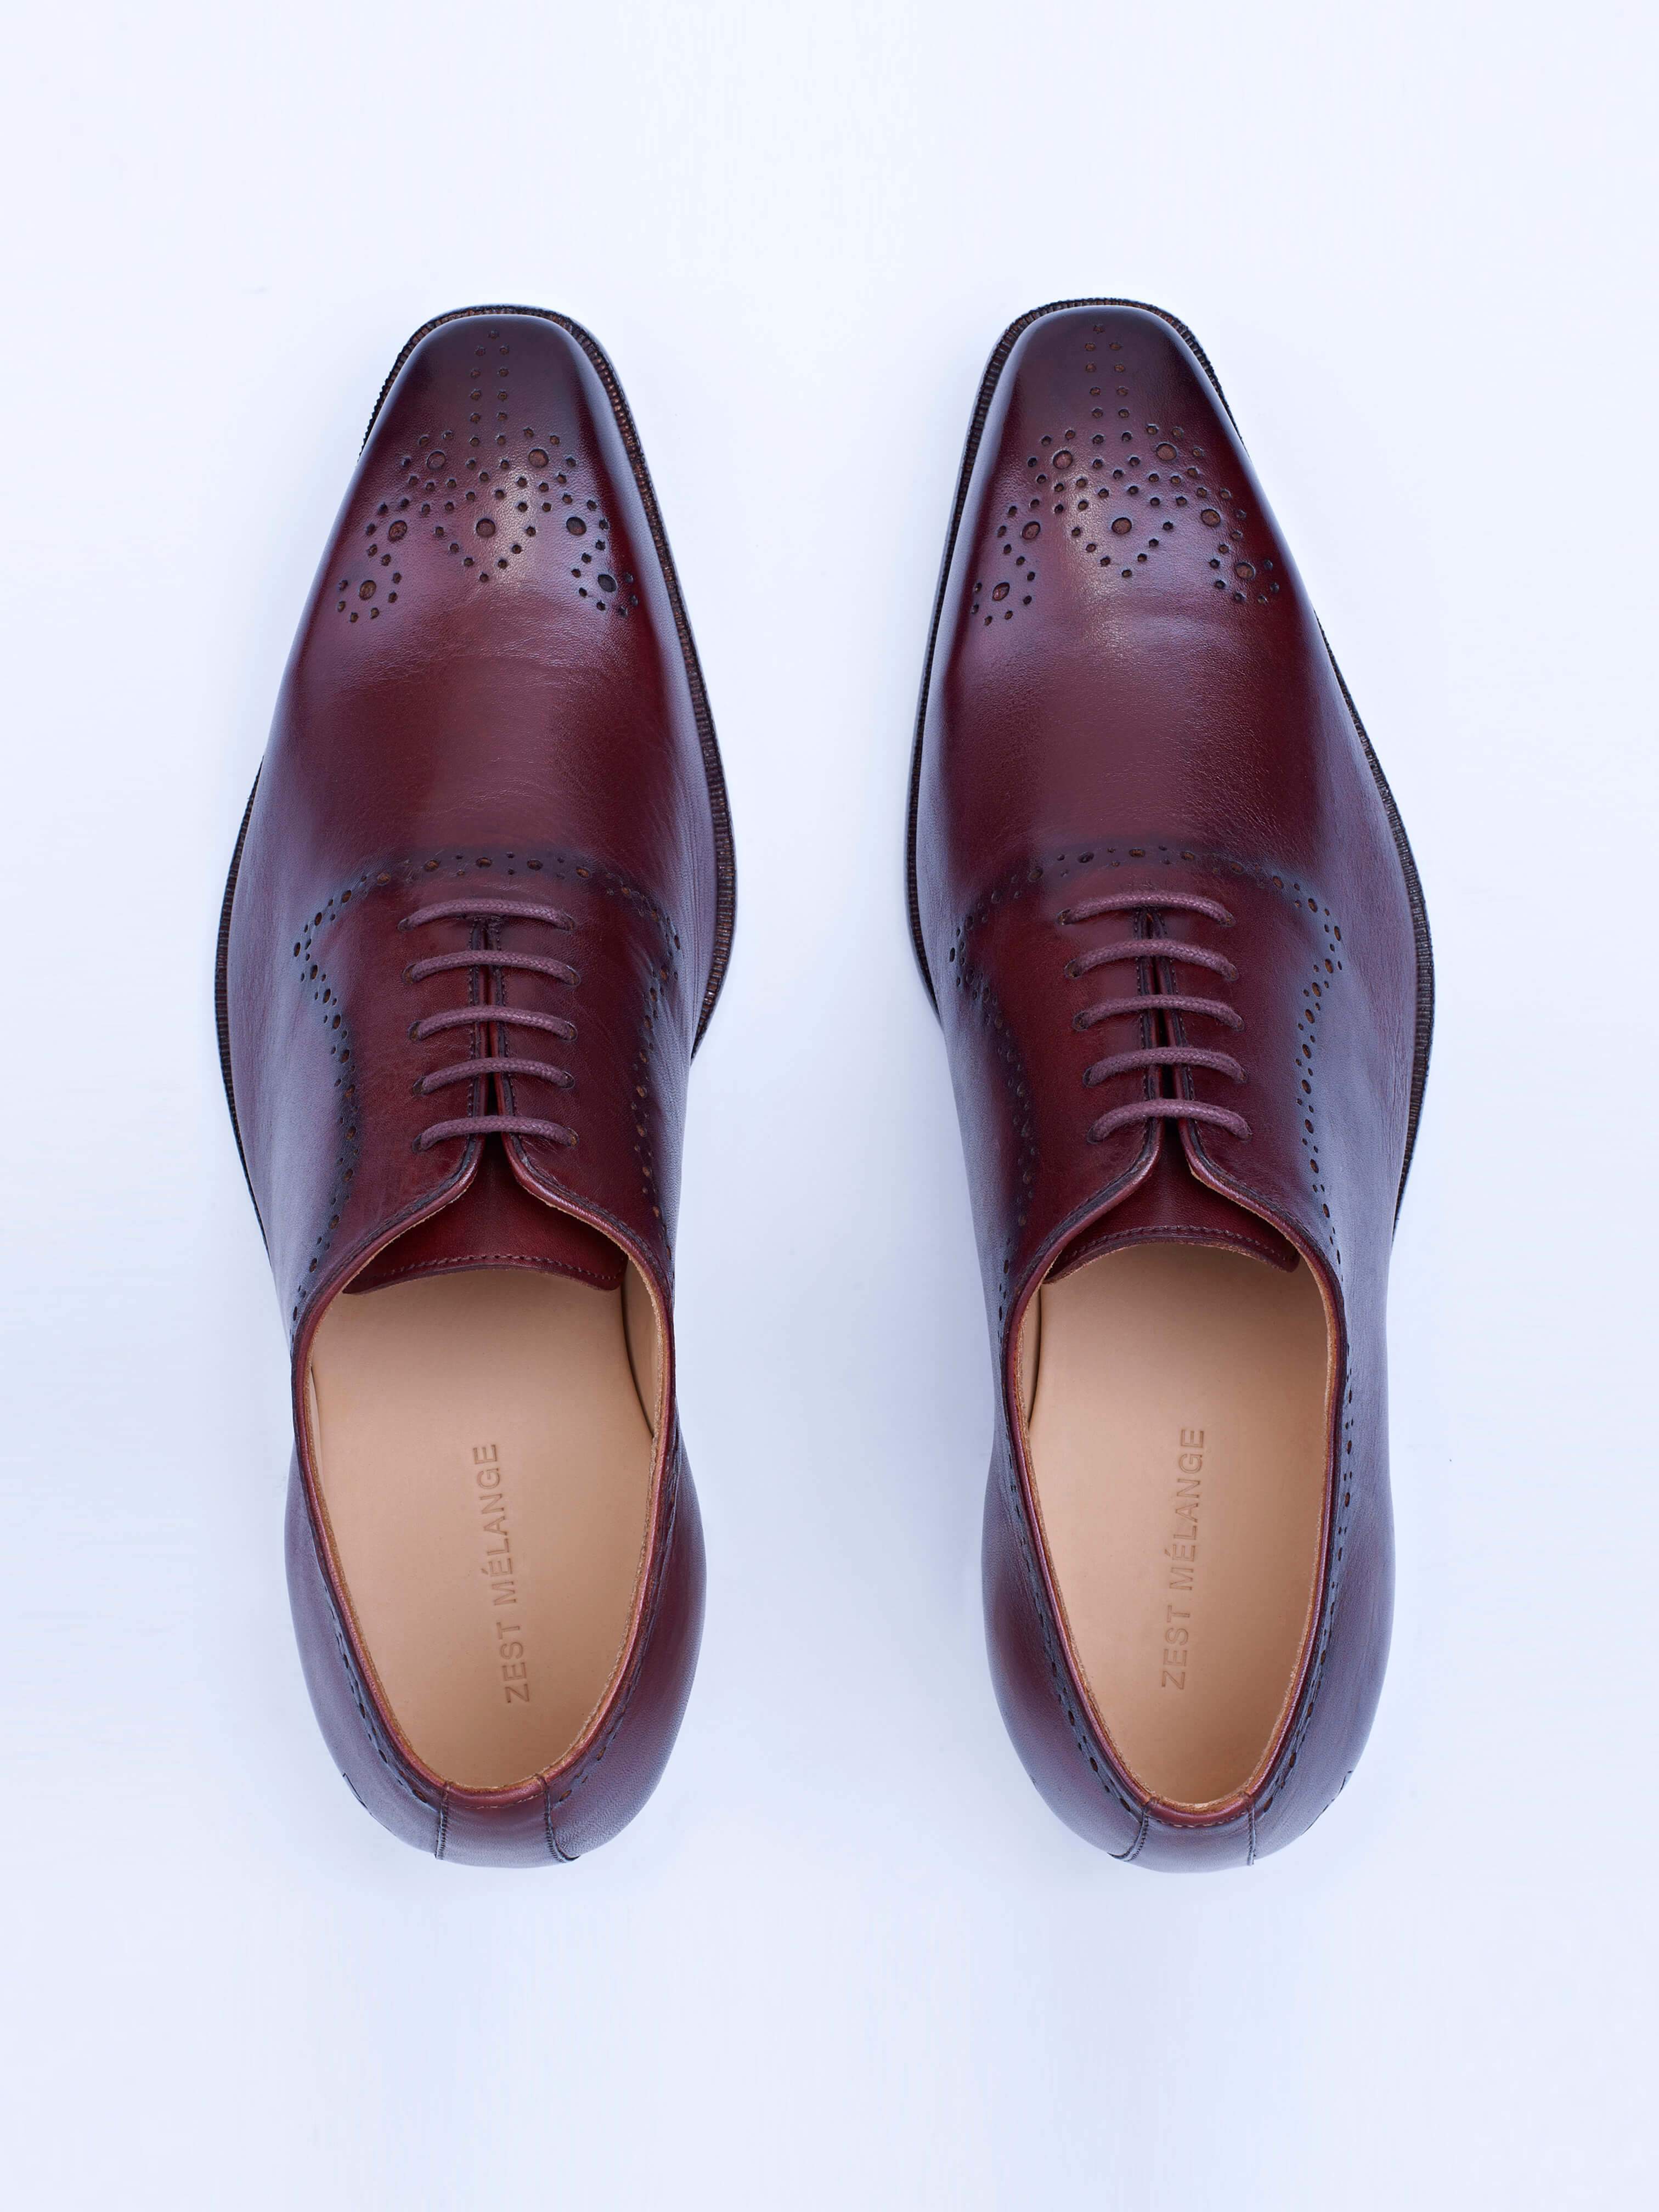 Oxford Lace Up Shoes With Broguing (Brown) - Zest Mélange 